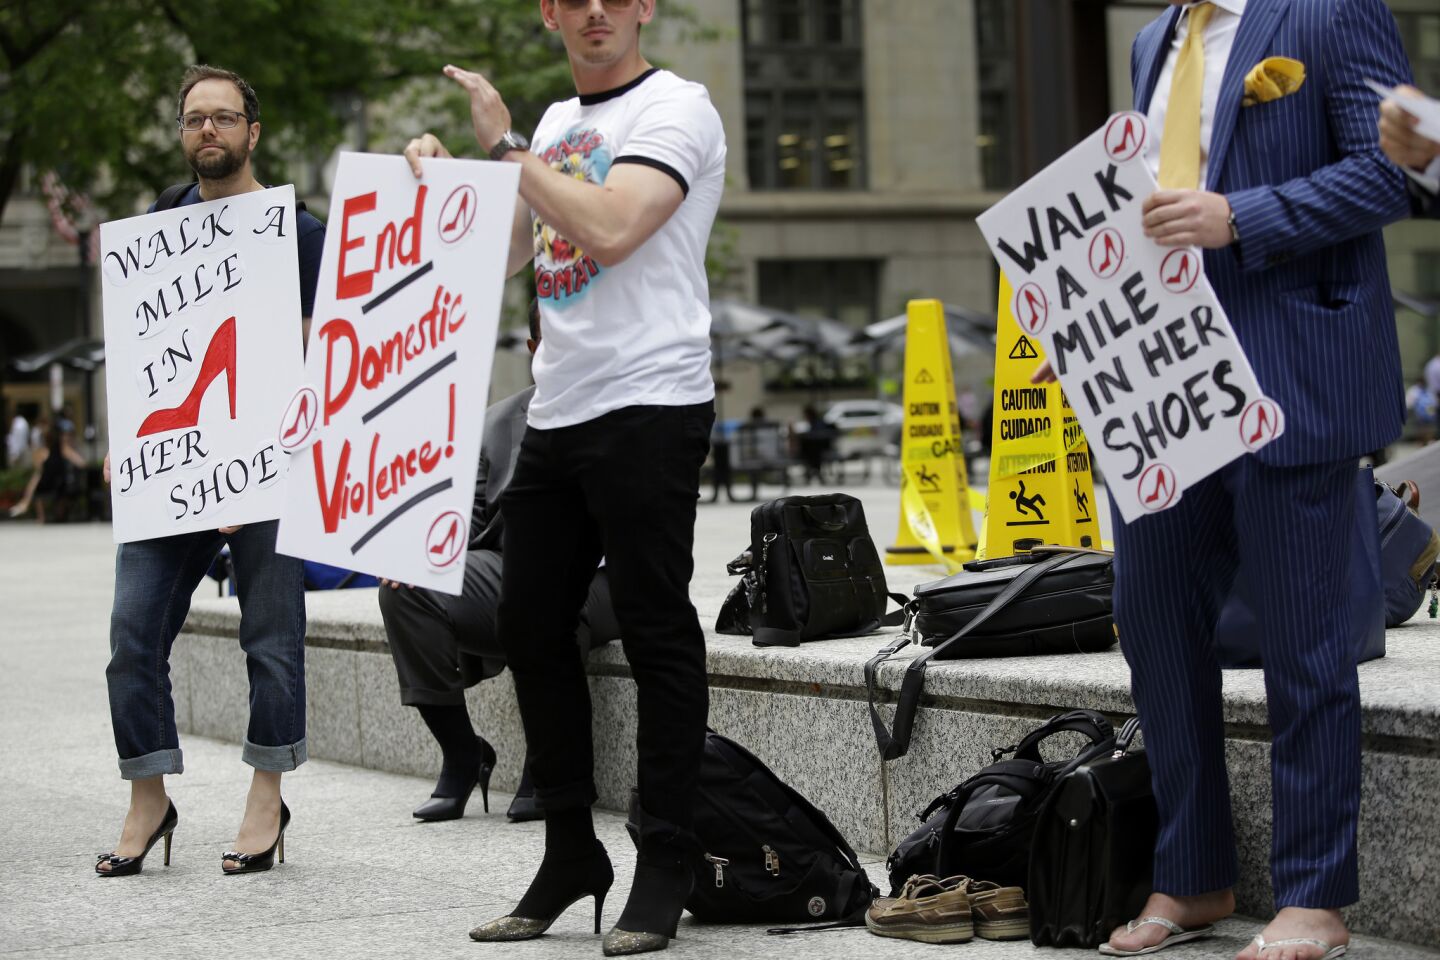 Male attorneys strapped on pairs of high heels to shed some light on violence against women during a Walk a Mile in Her Shoes event in Chicago, Illinois on June 14, 2018. Just under a dozen men from the Chicago Bar Association's Young Lawyers Section participated in the one-mile march from Daley Plaza to the Hyatt Hotel.